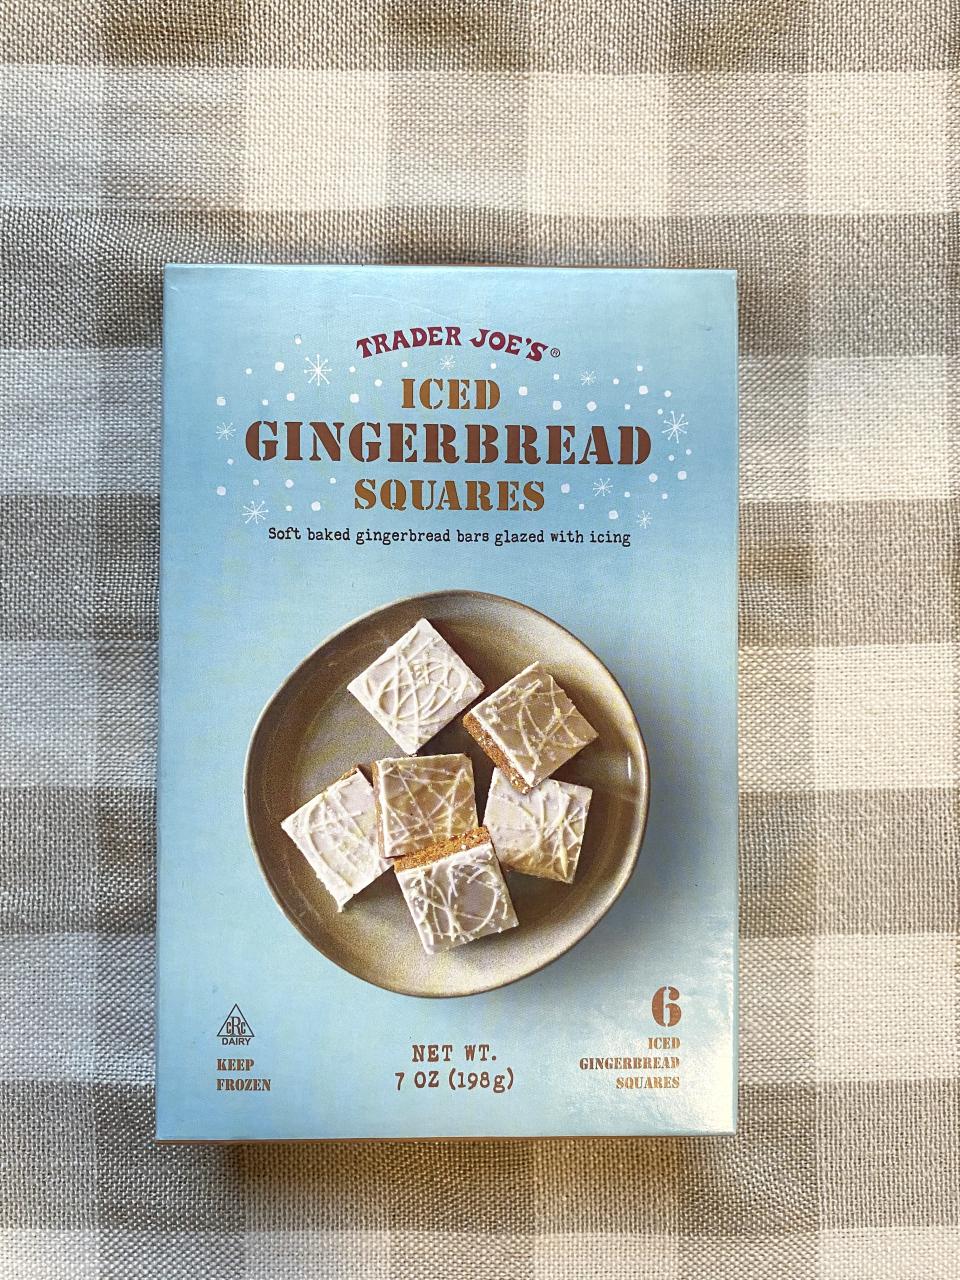 A box of Iced Gingerbread Squares